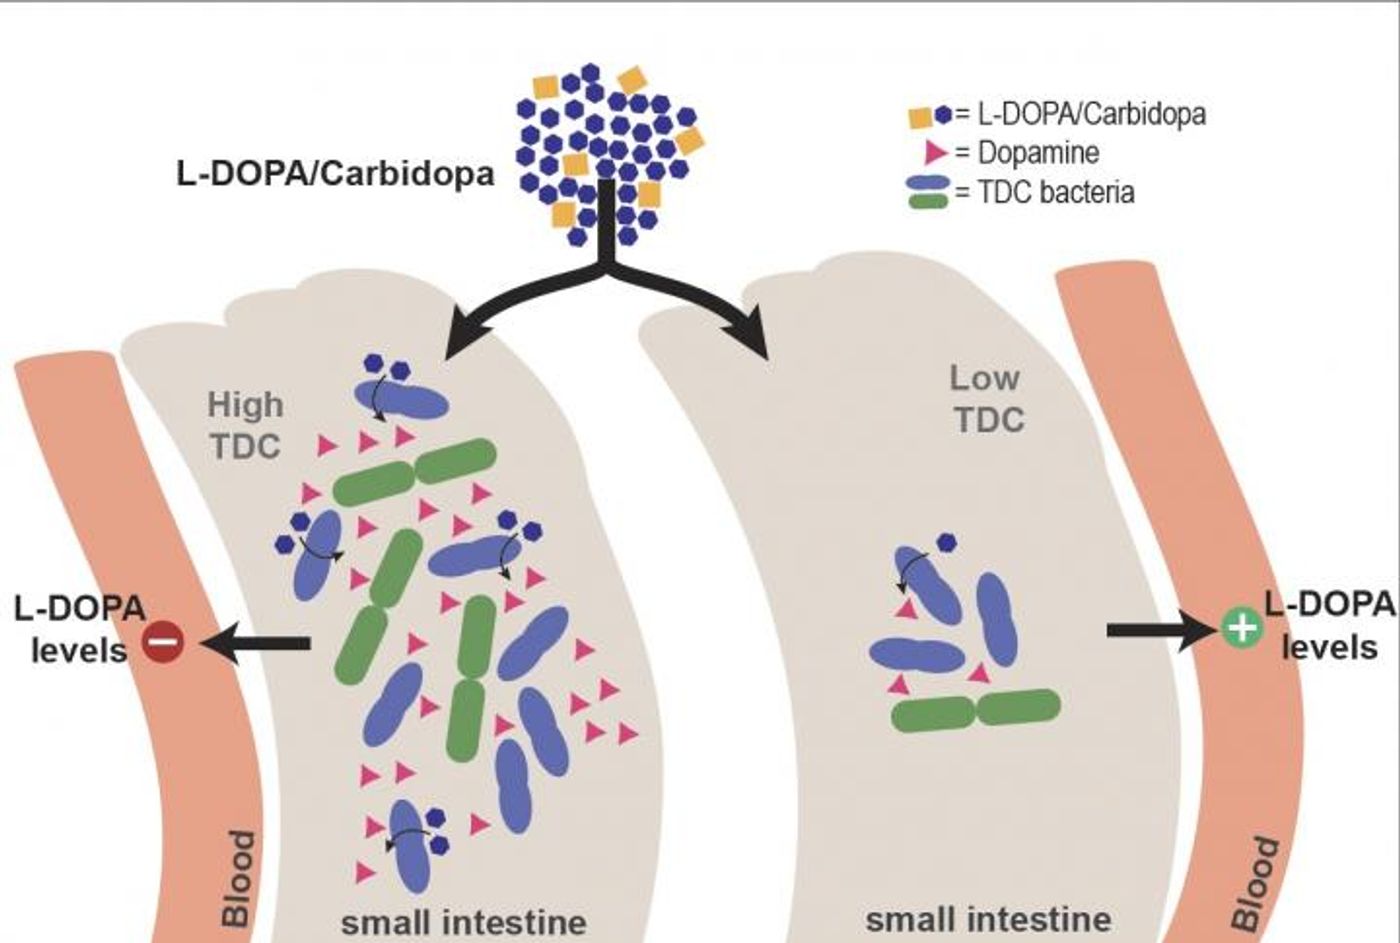 The presence of more bacteria producing the tyrosine decarboxylase (TDC) enzyme means less levodopa in the bloodstream.  / Credit: S. El Aidy, University of Groningen